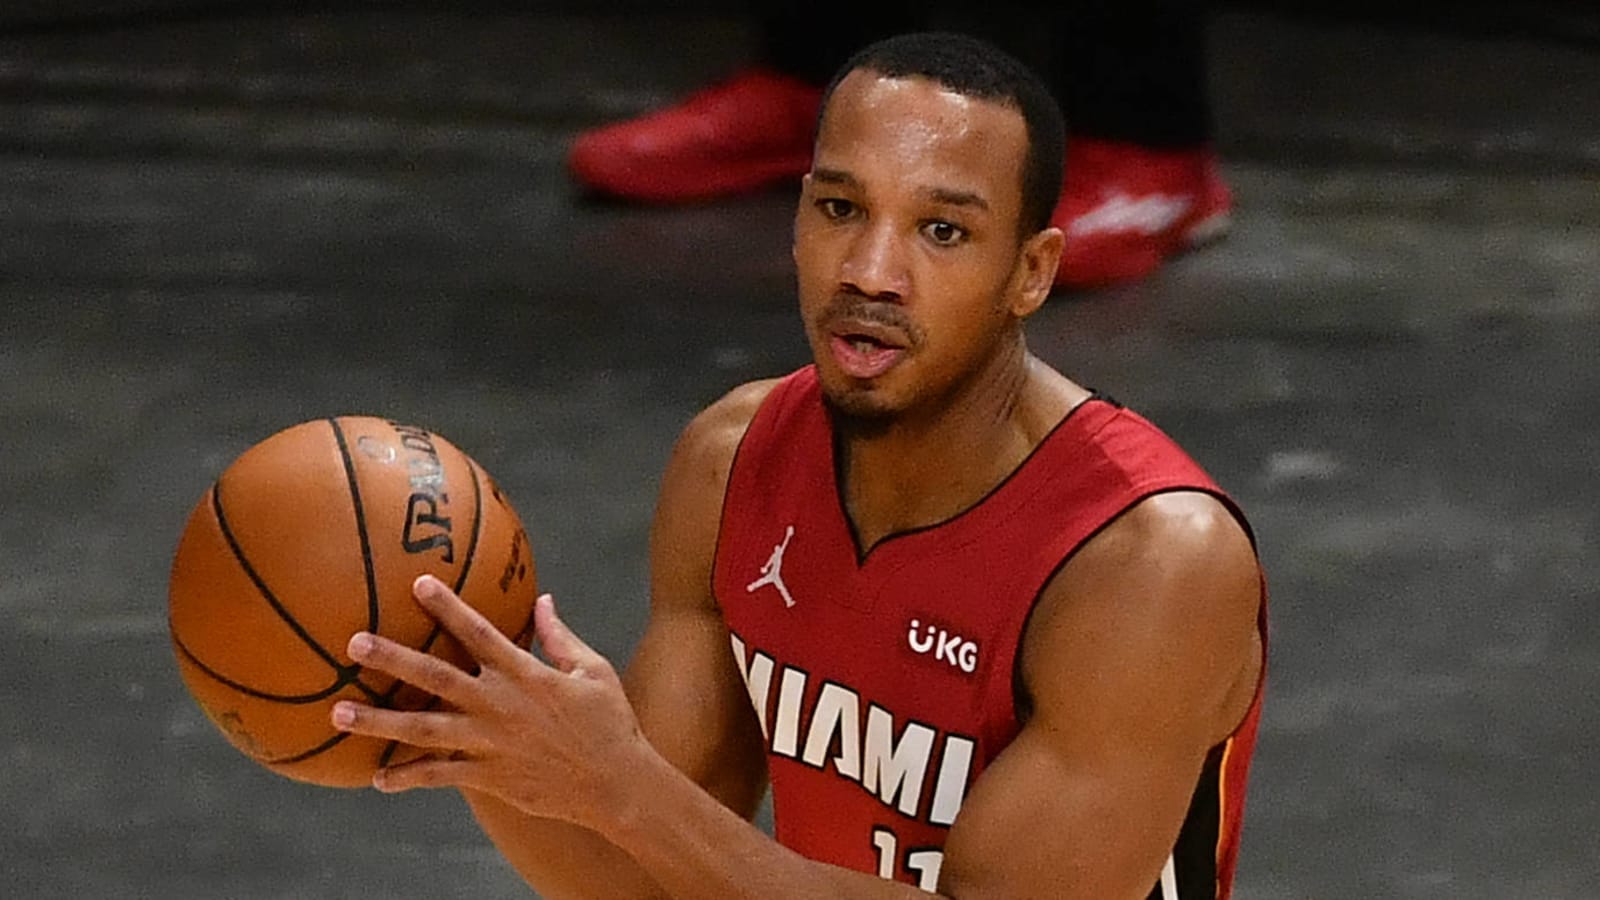 Heat guard Avery Bradley upset to learn he got COVID at work